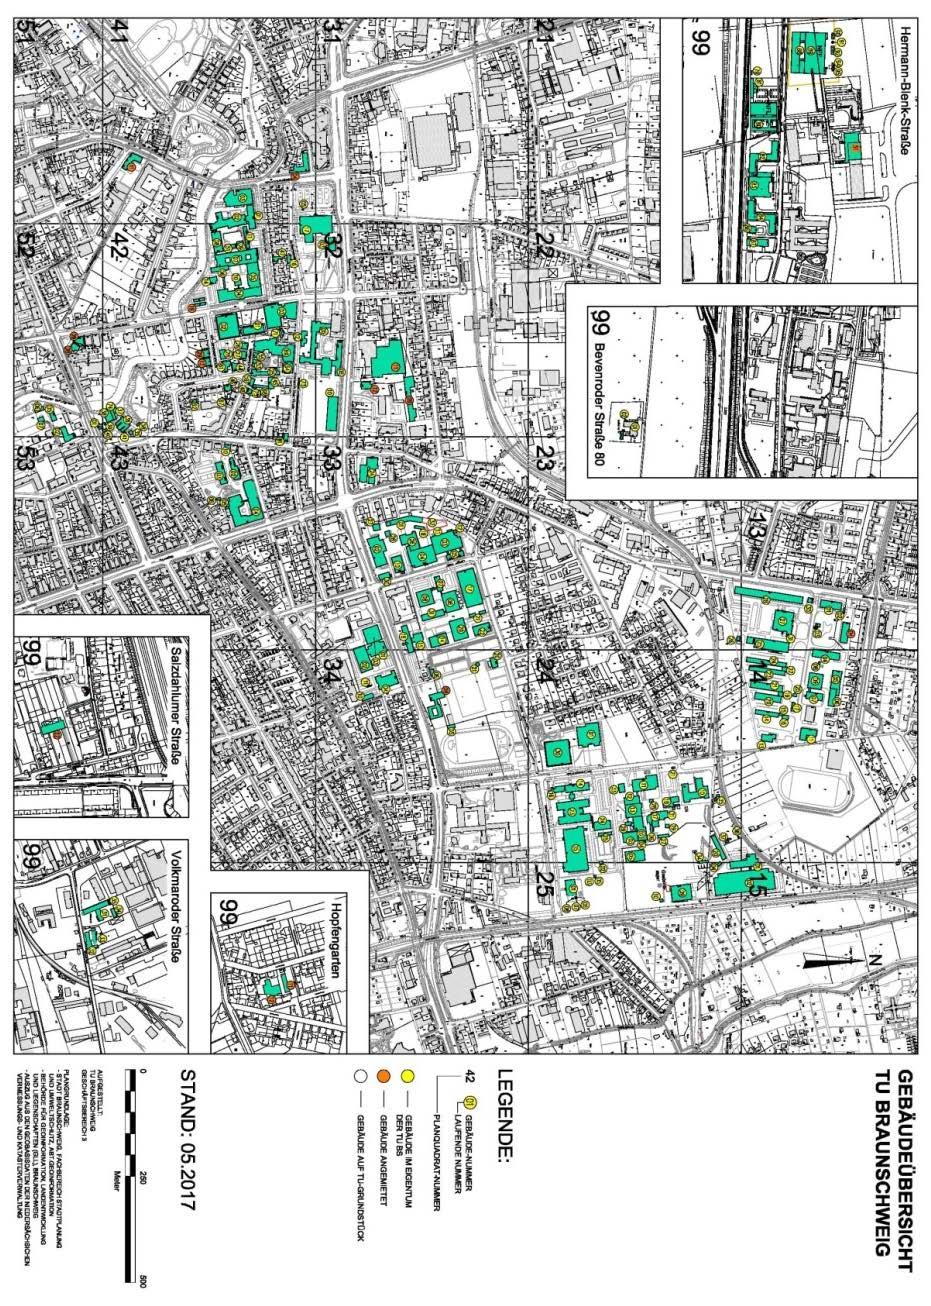 Braunschweig University of Technology an overview 190 Buildings 260 Accounts 630 Energy measuring points 1,000 Technical sites, large research